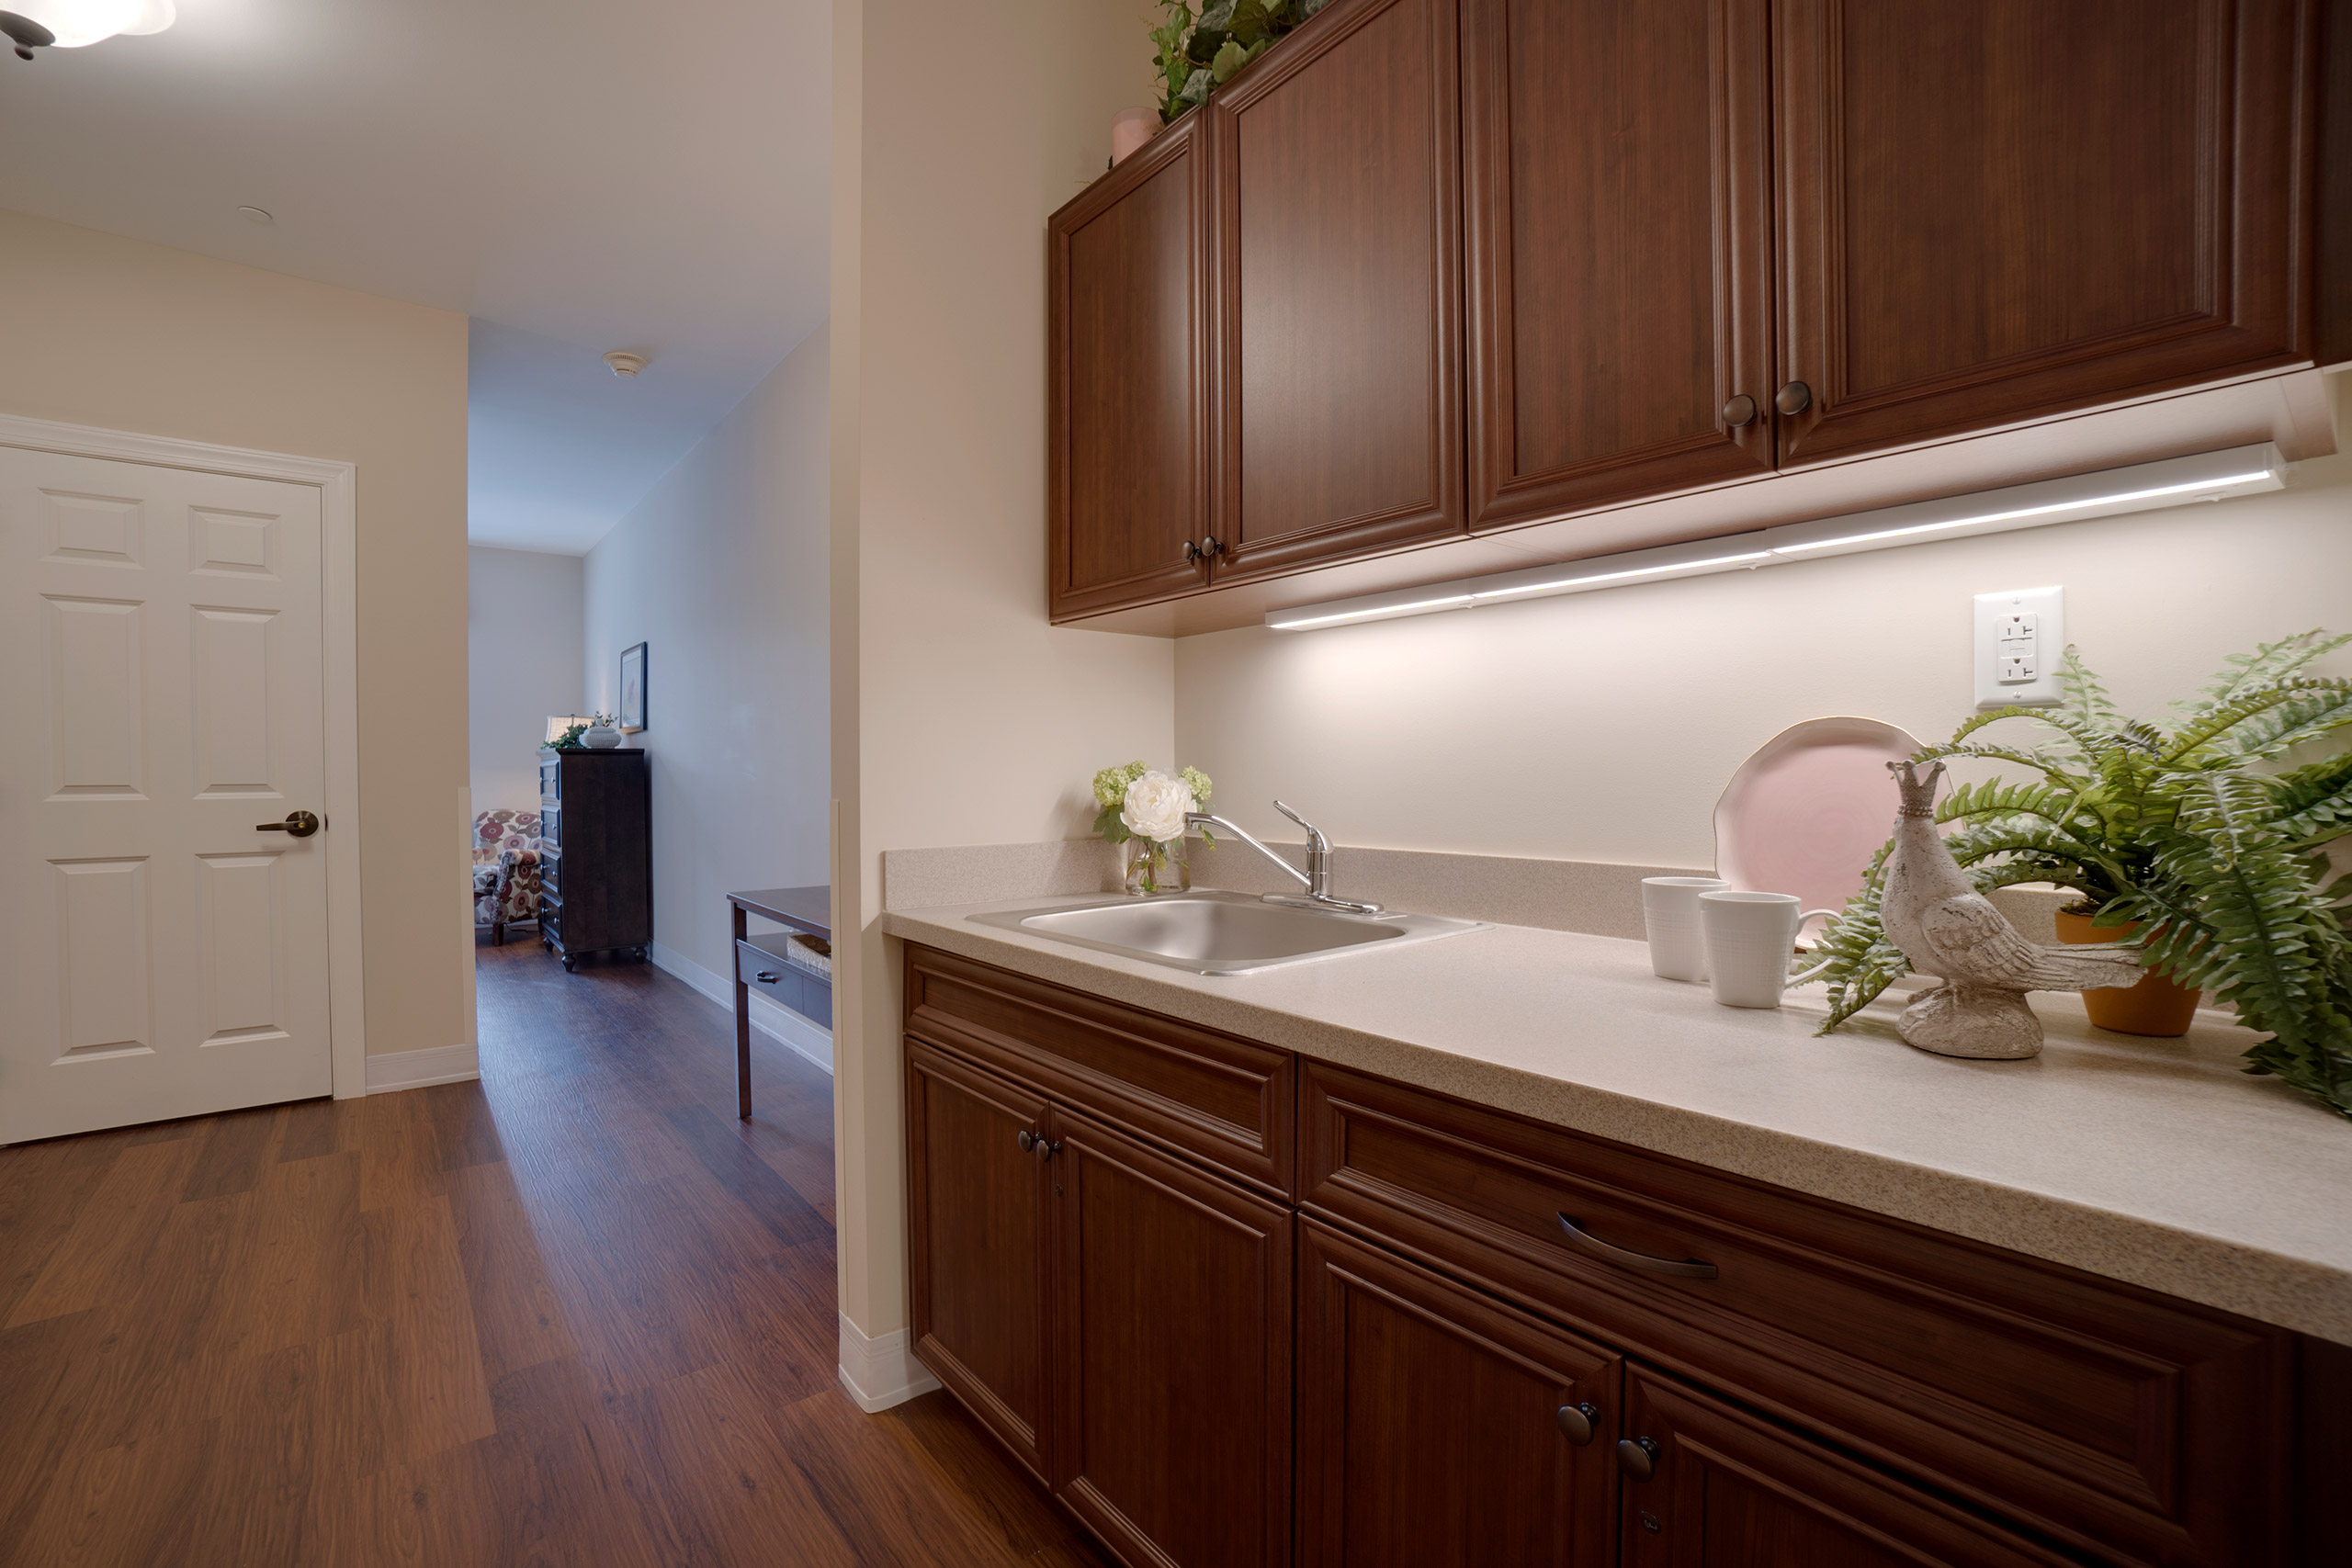 Assisted living apartments include small galley kitchen areas